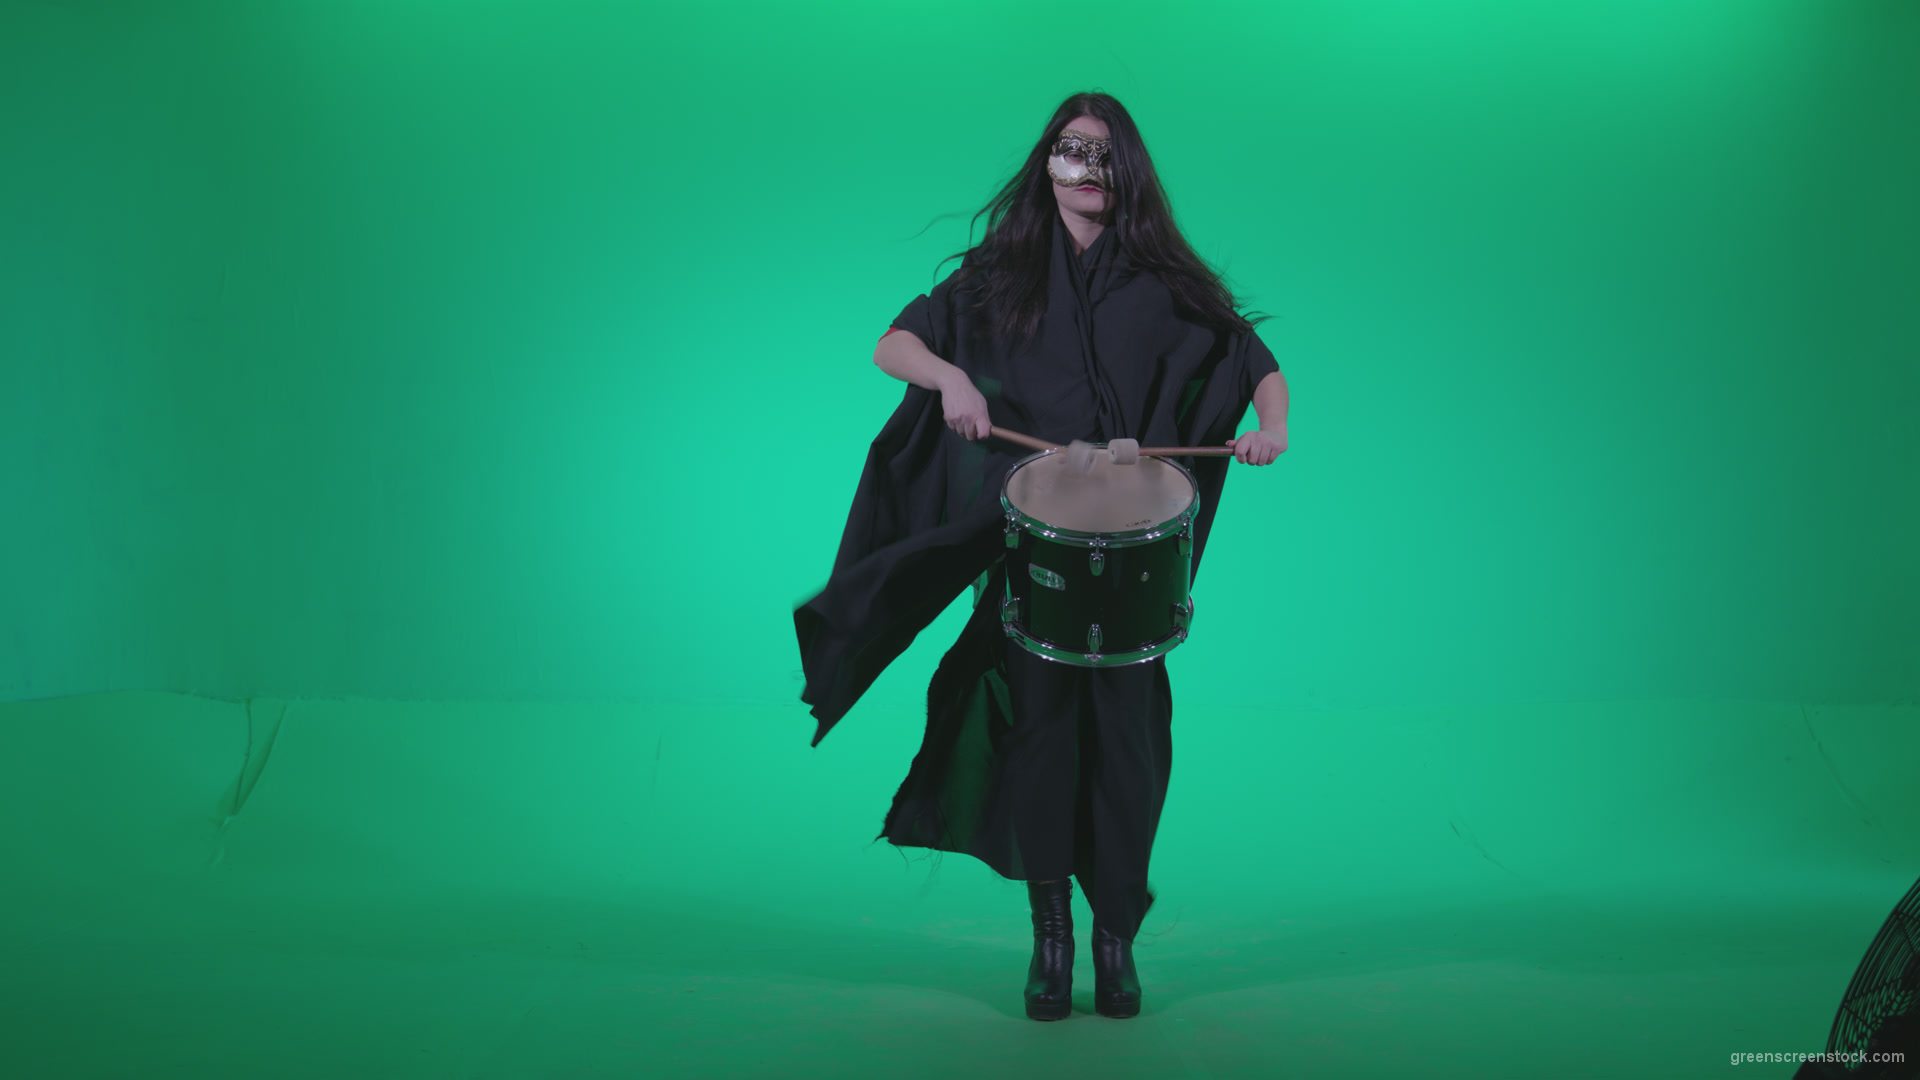 Gothic-Snare-Drumming-girl-g4_007 Green Screen Stock